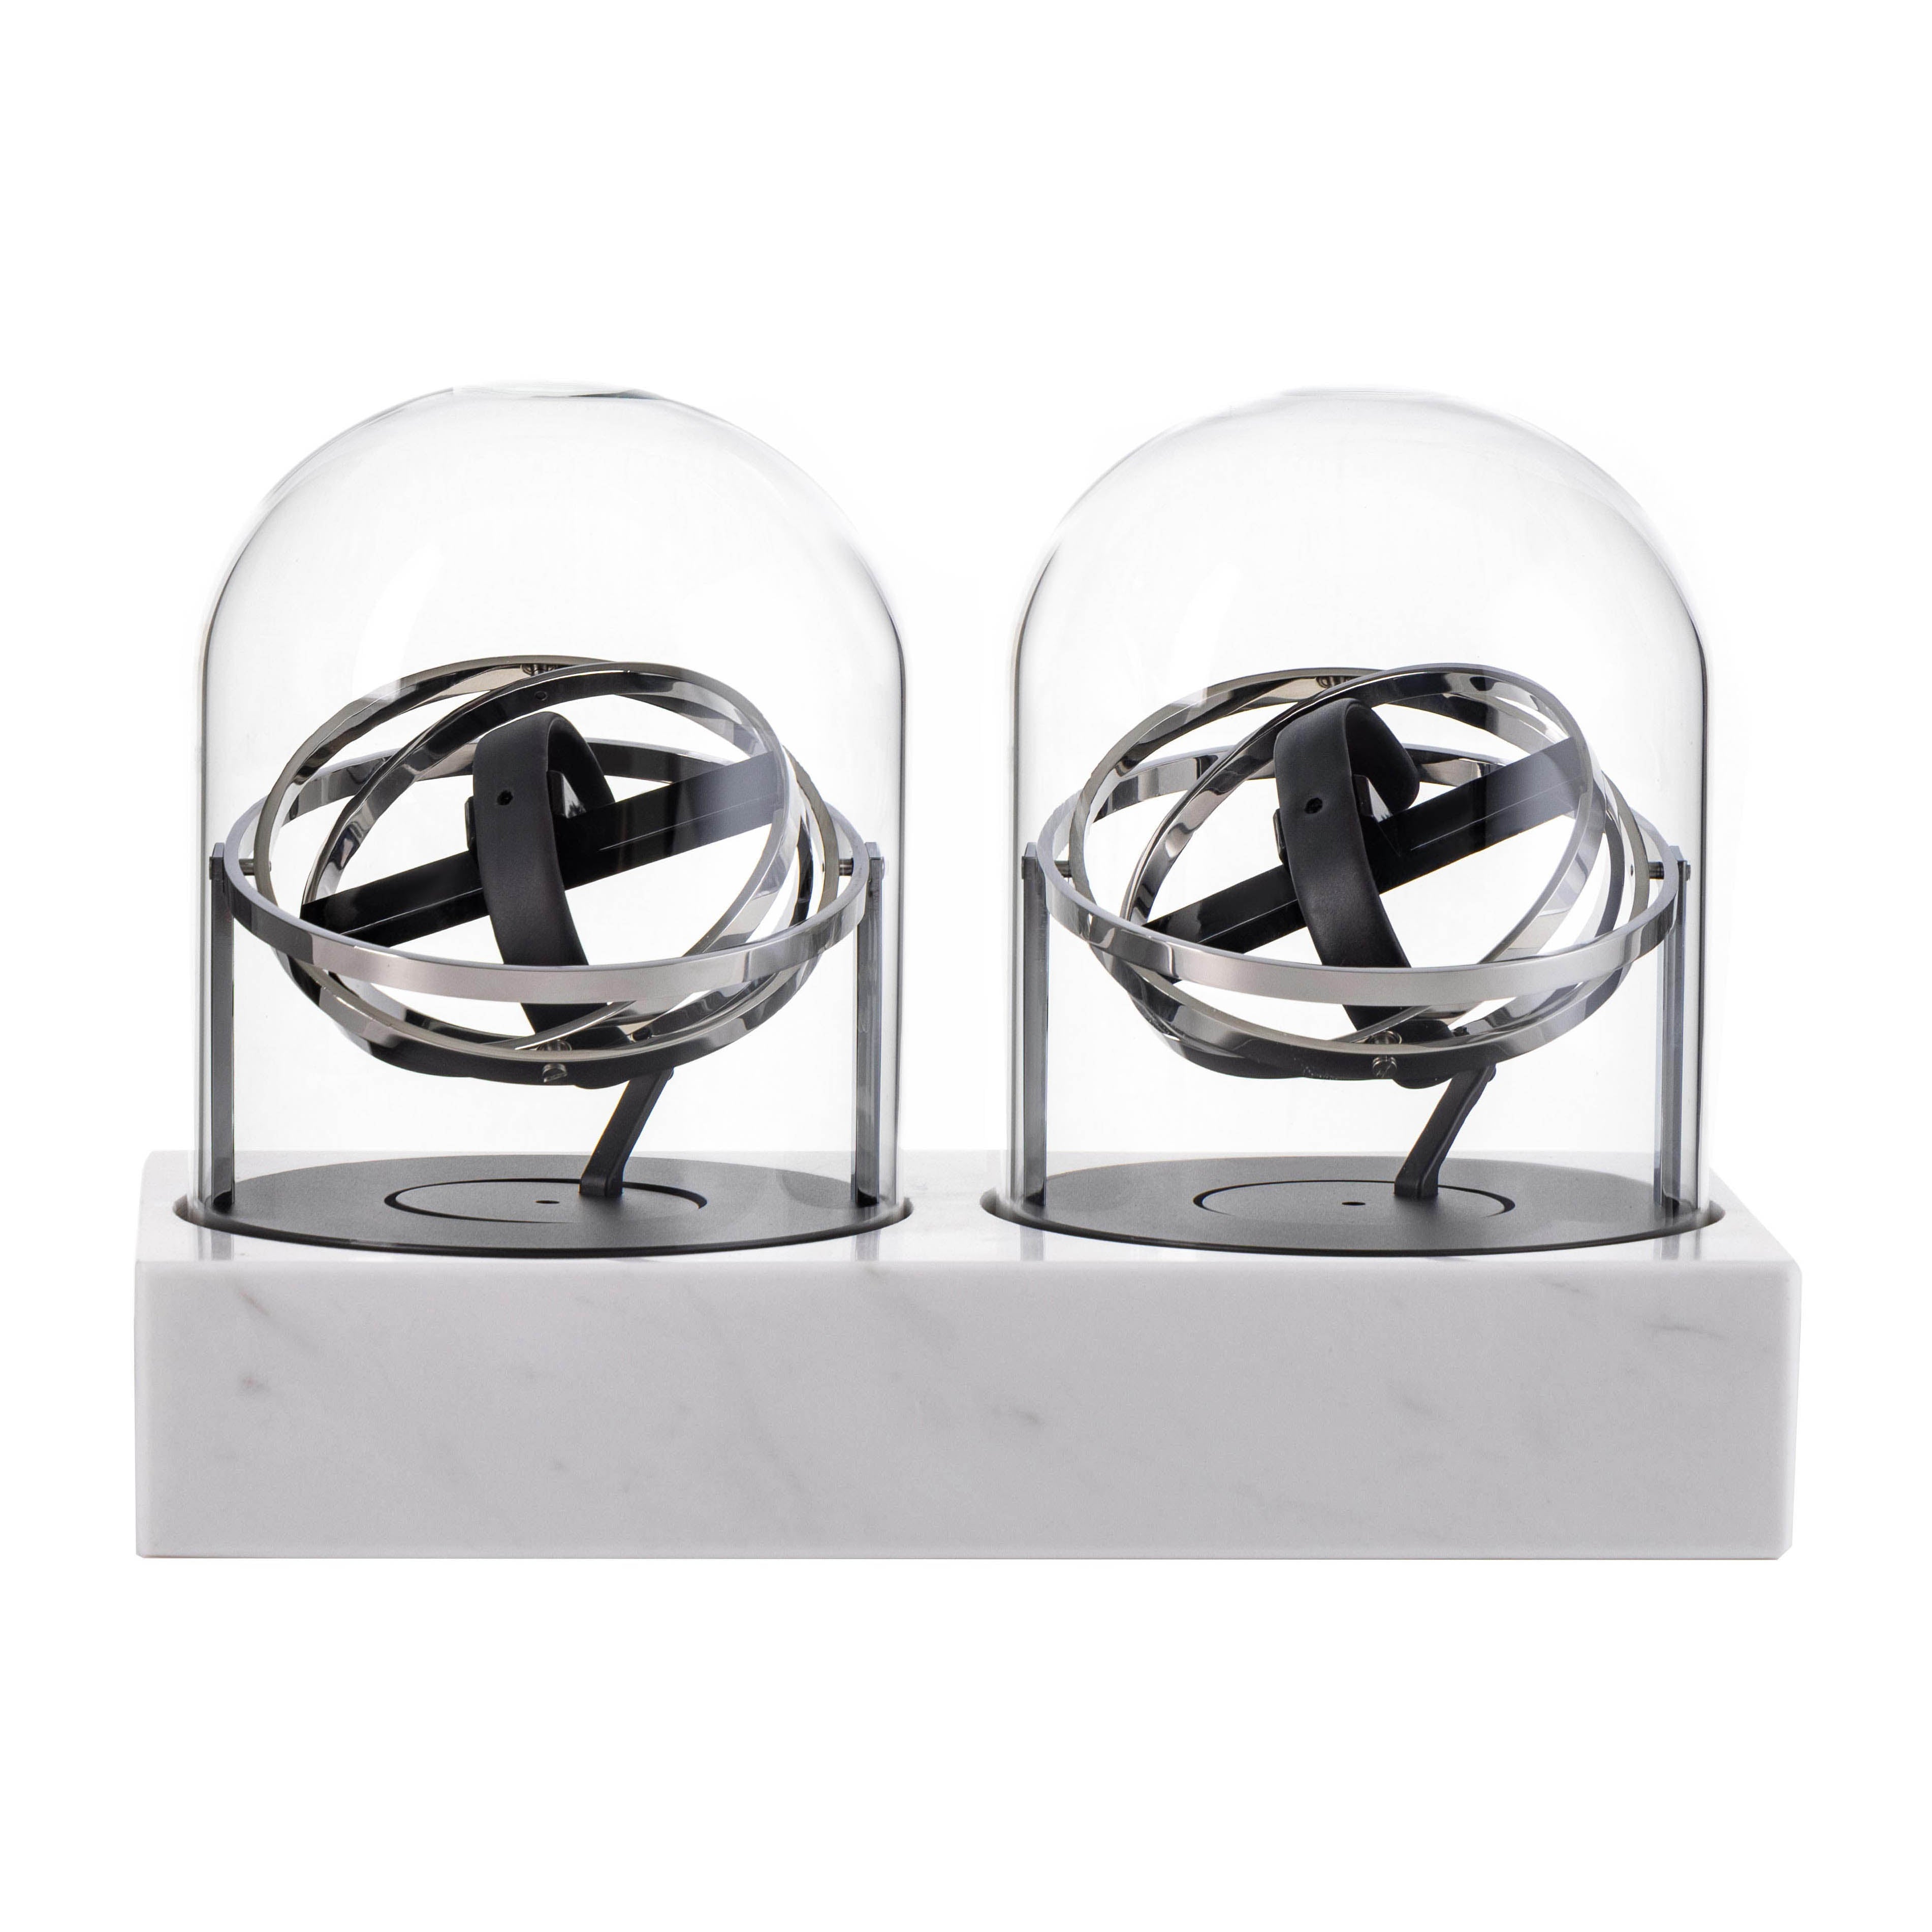 Double Watch Winder - Astronomia X1 Gold - White Marble Edition